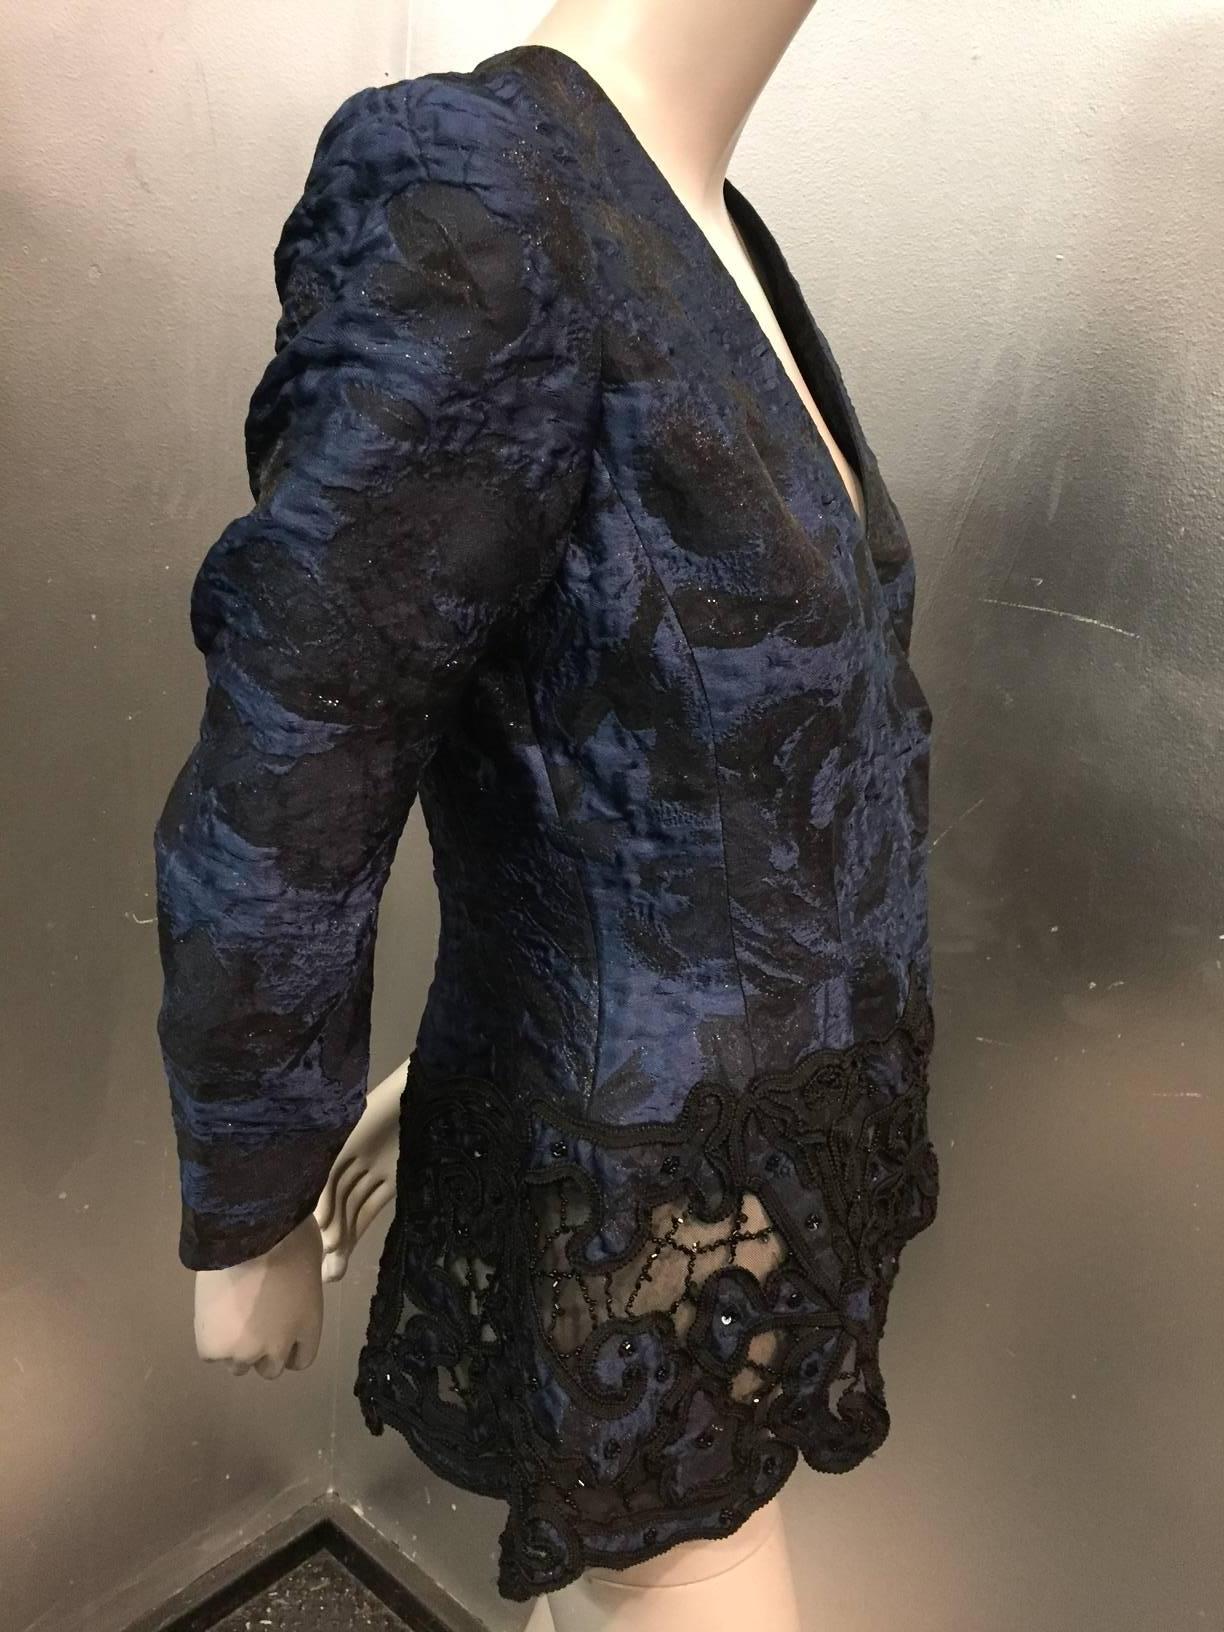 Oscar de la Renta navy and black brocade dinner jacket with peplum of cut-out re-embroidered lace. Hidden wrap closure. 